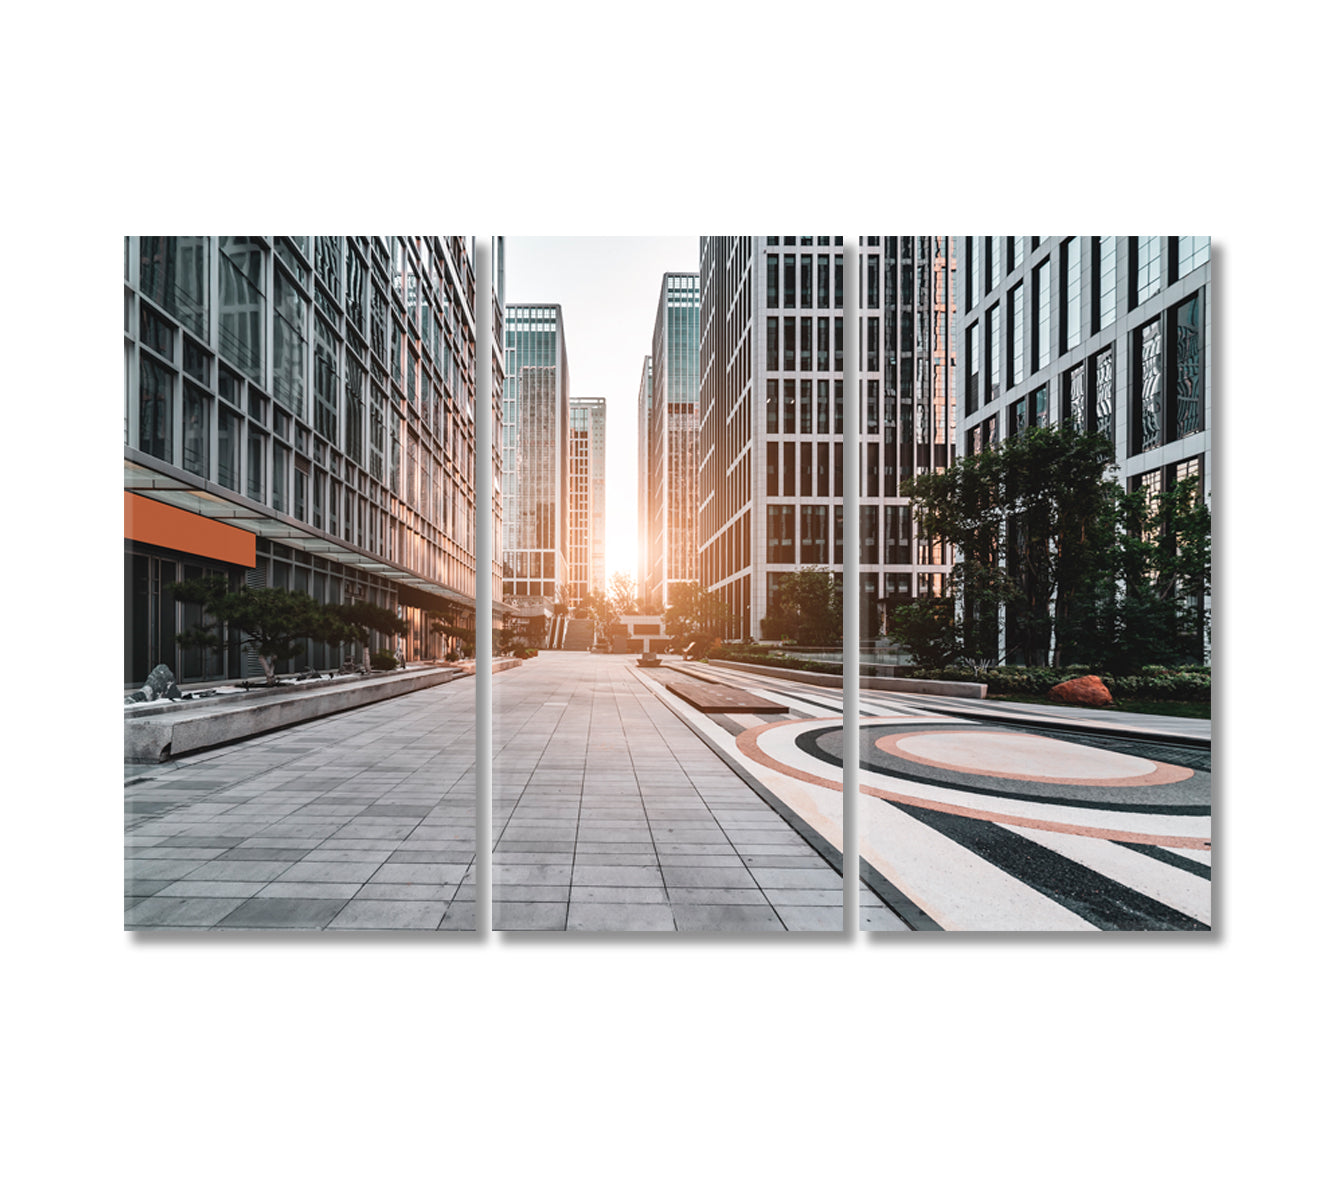 Modern Architecture Office Building in Jinan Financial District Canvas Print-Canvas Print-CetArt-3 Panels-36x24 inches-CetArt